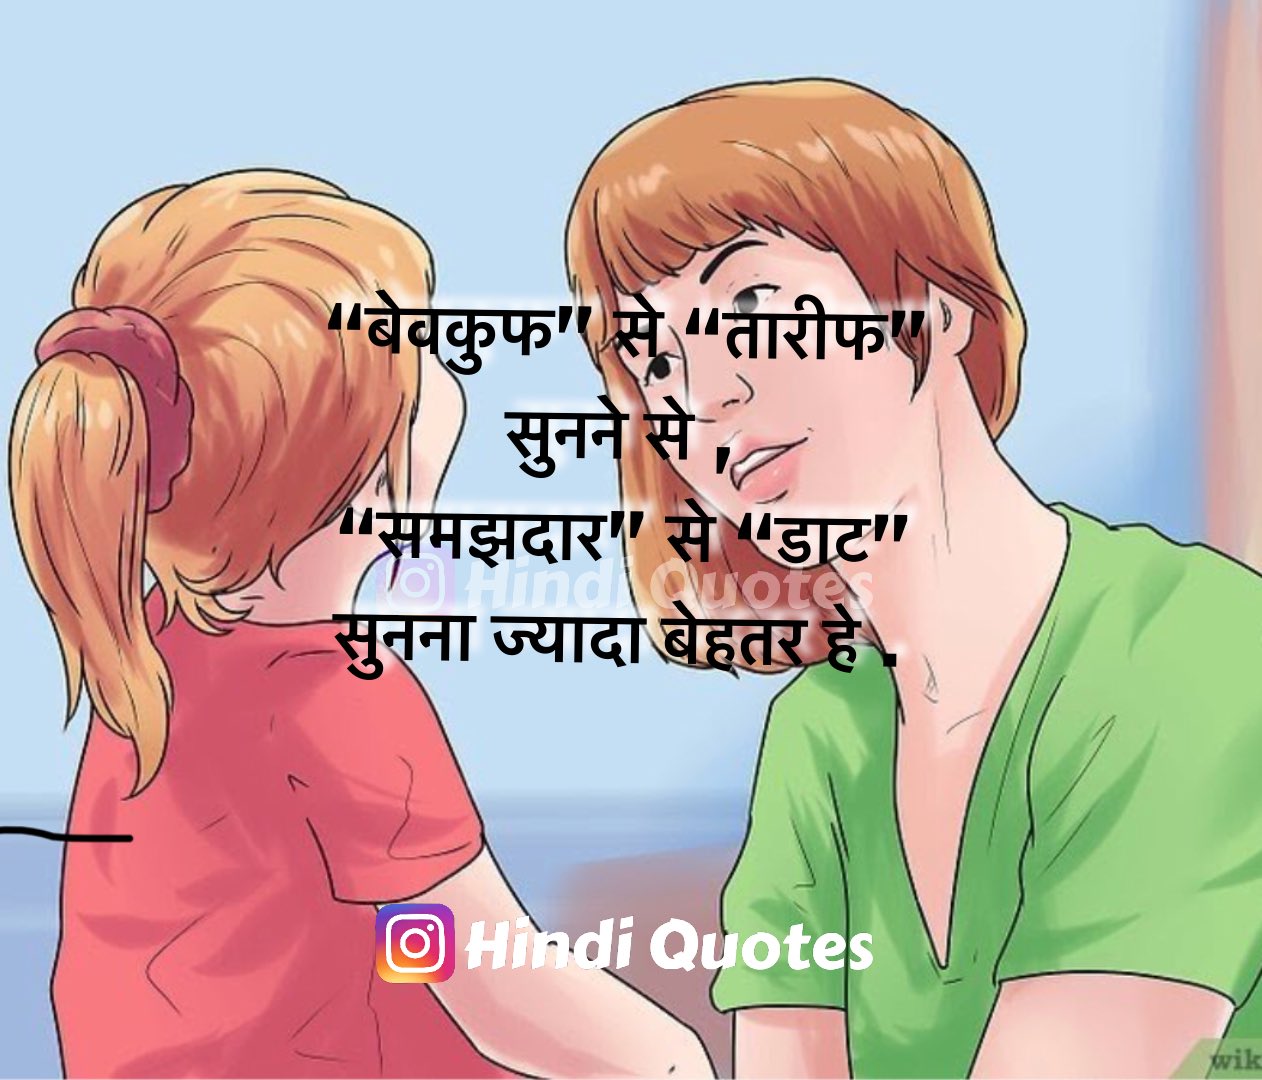 Hindi Quotes on Twitter: 